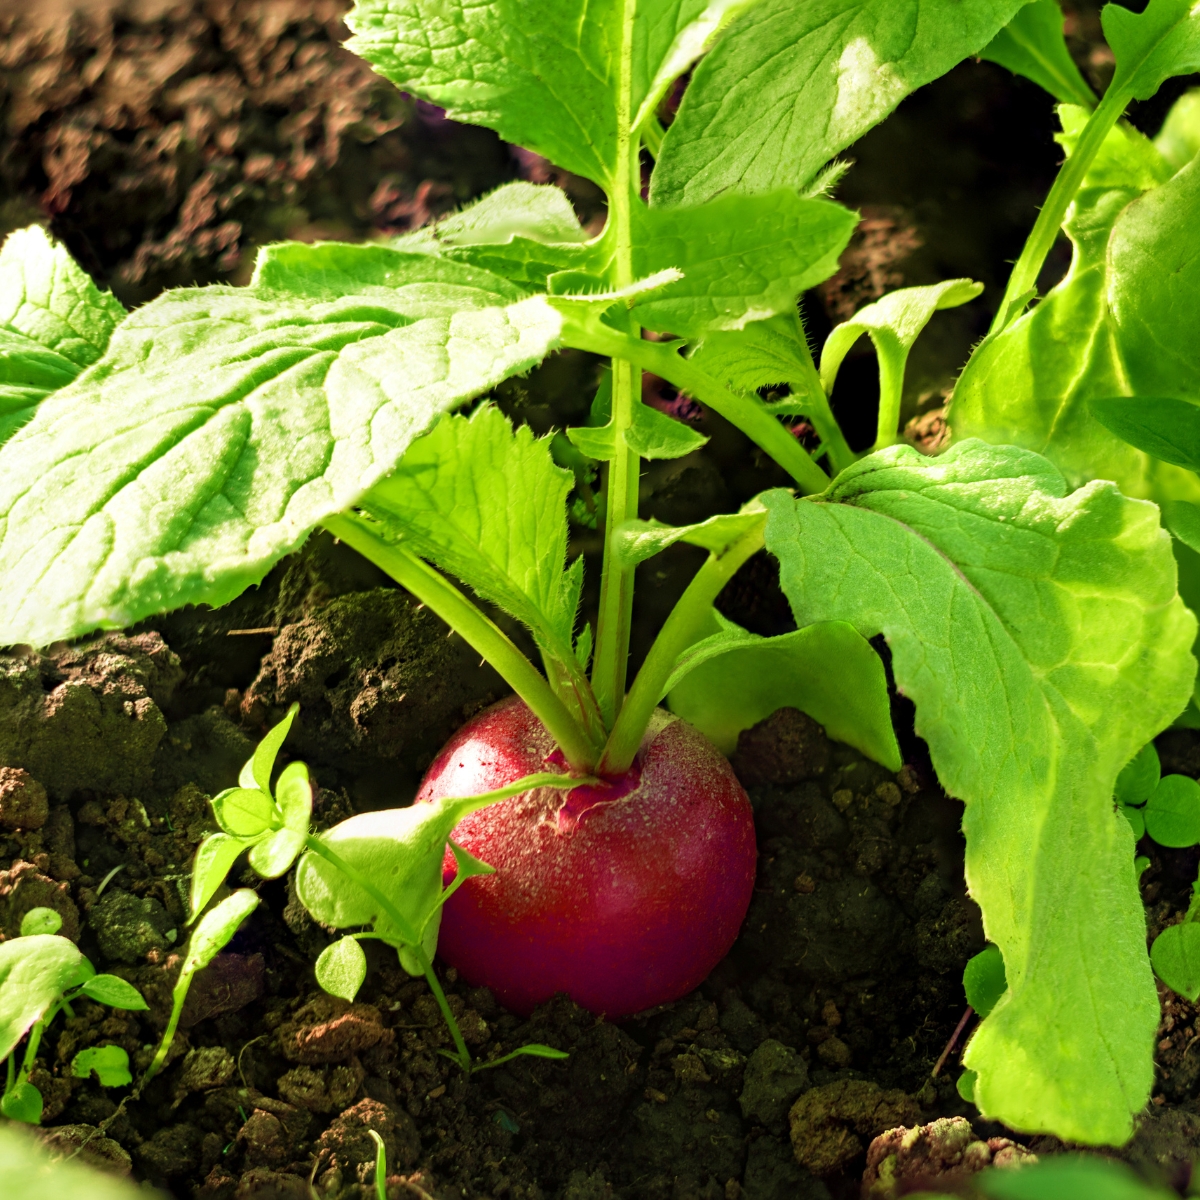 growing radishes from seed